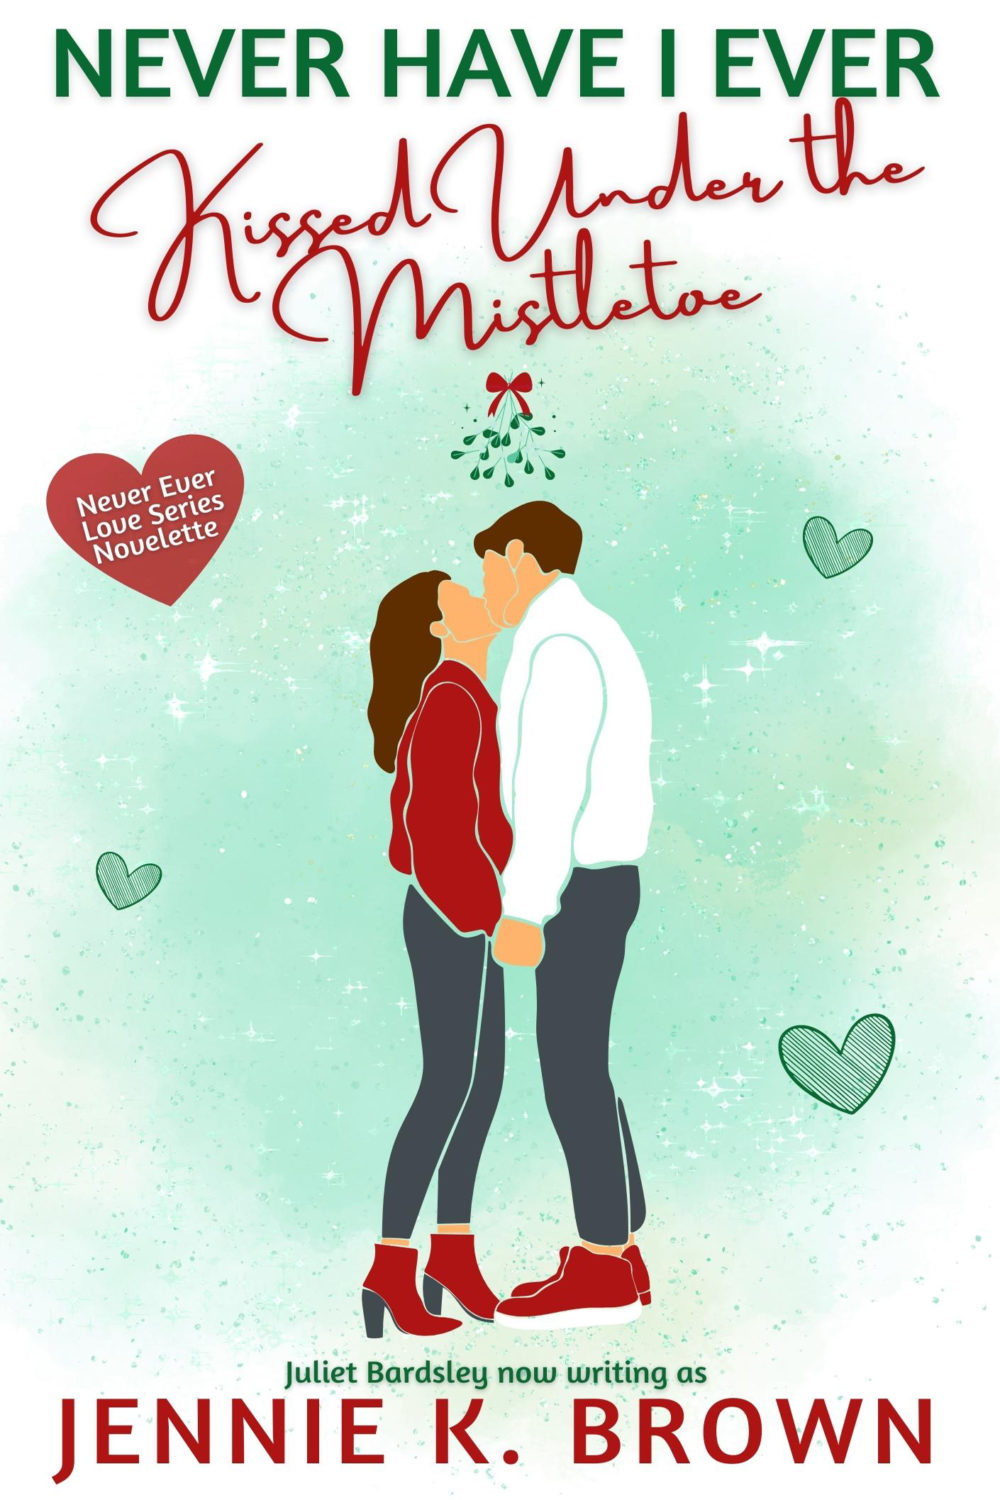 Never Have I Ever Kissed Under the Mistletoe by Jennie K. Brown